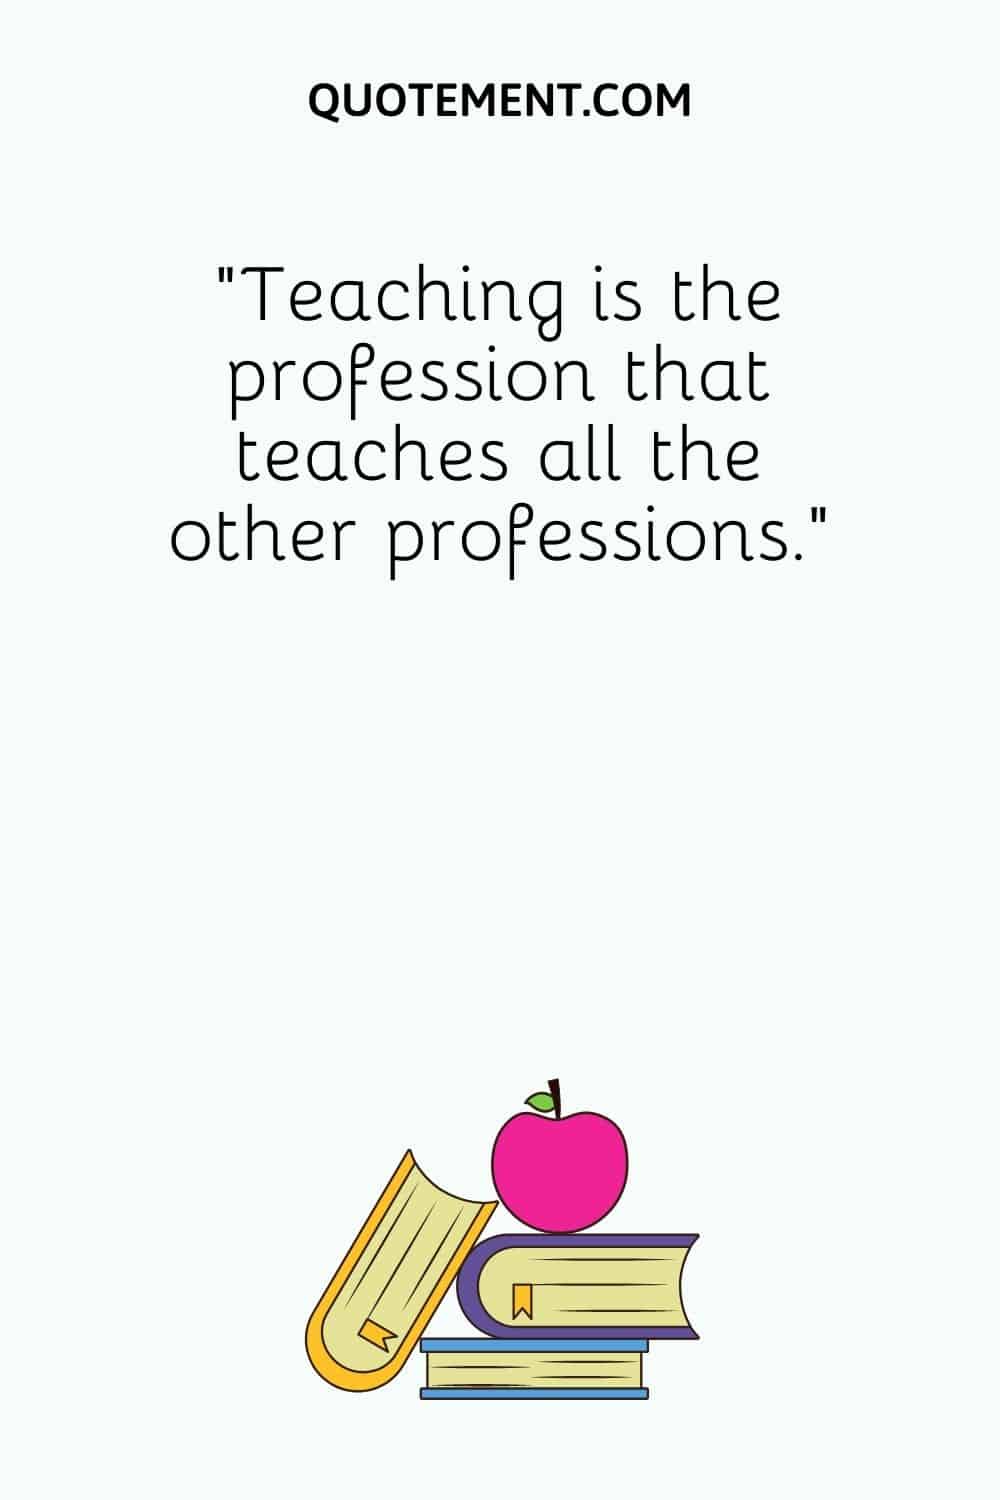 Teaching is the profession that teaches all the other professions